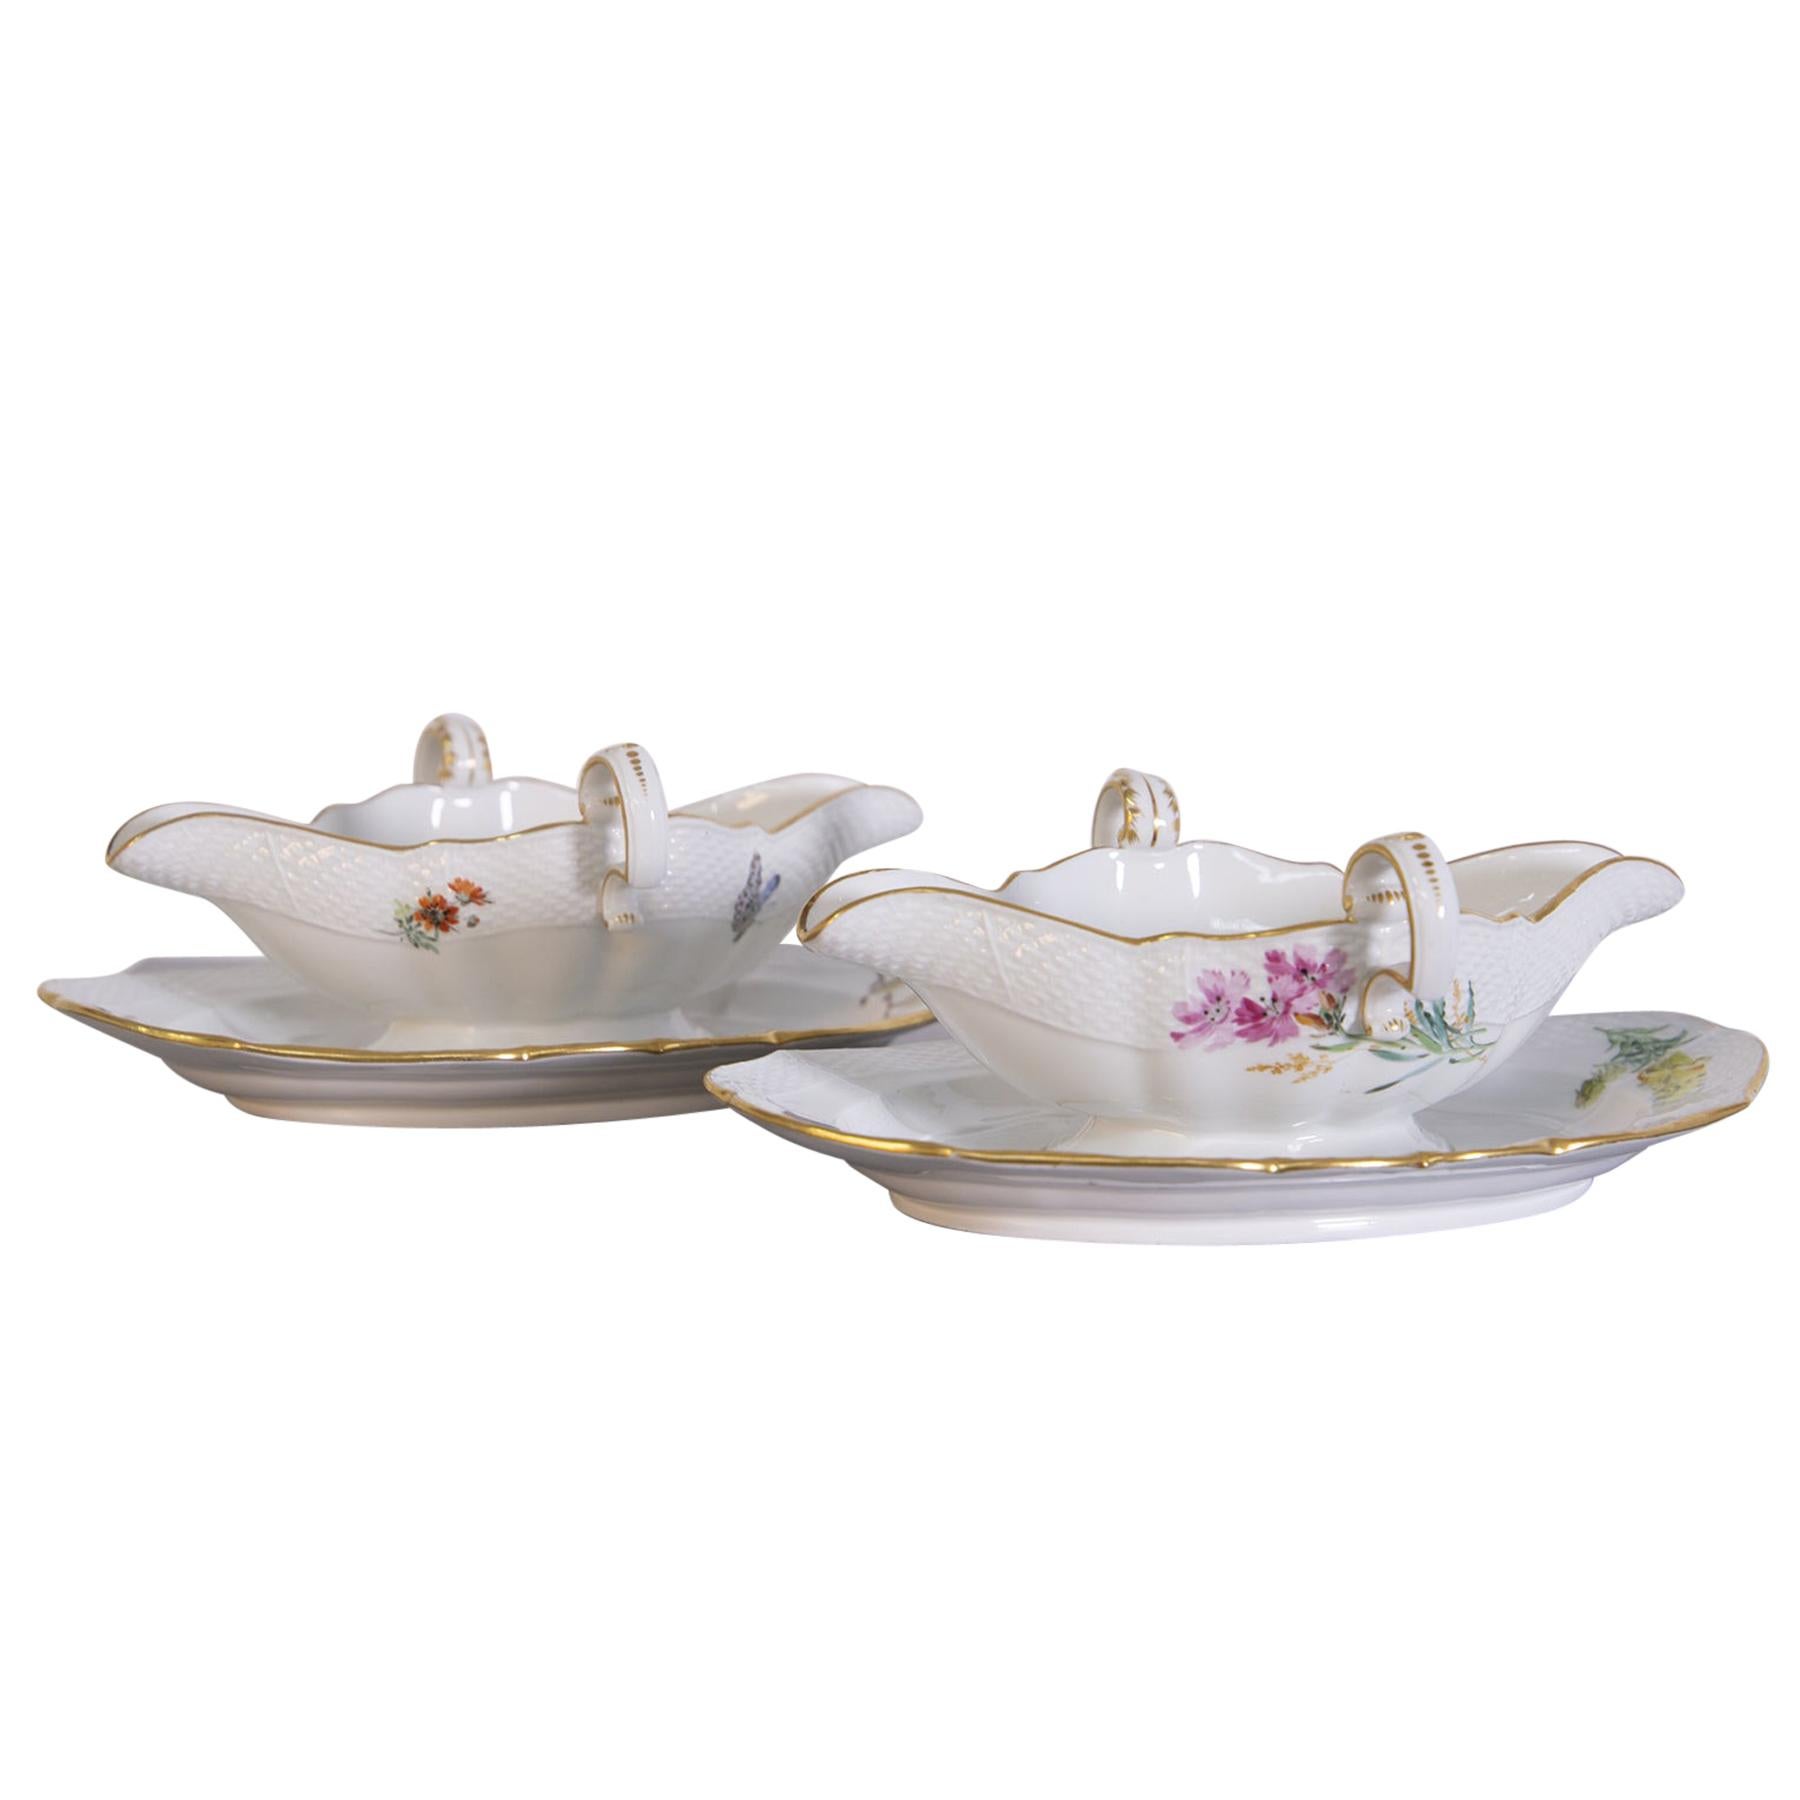 Pair of Meissen Legume Dishes from the Marcolini Period, 18th Century